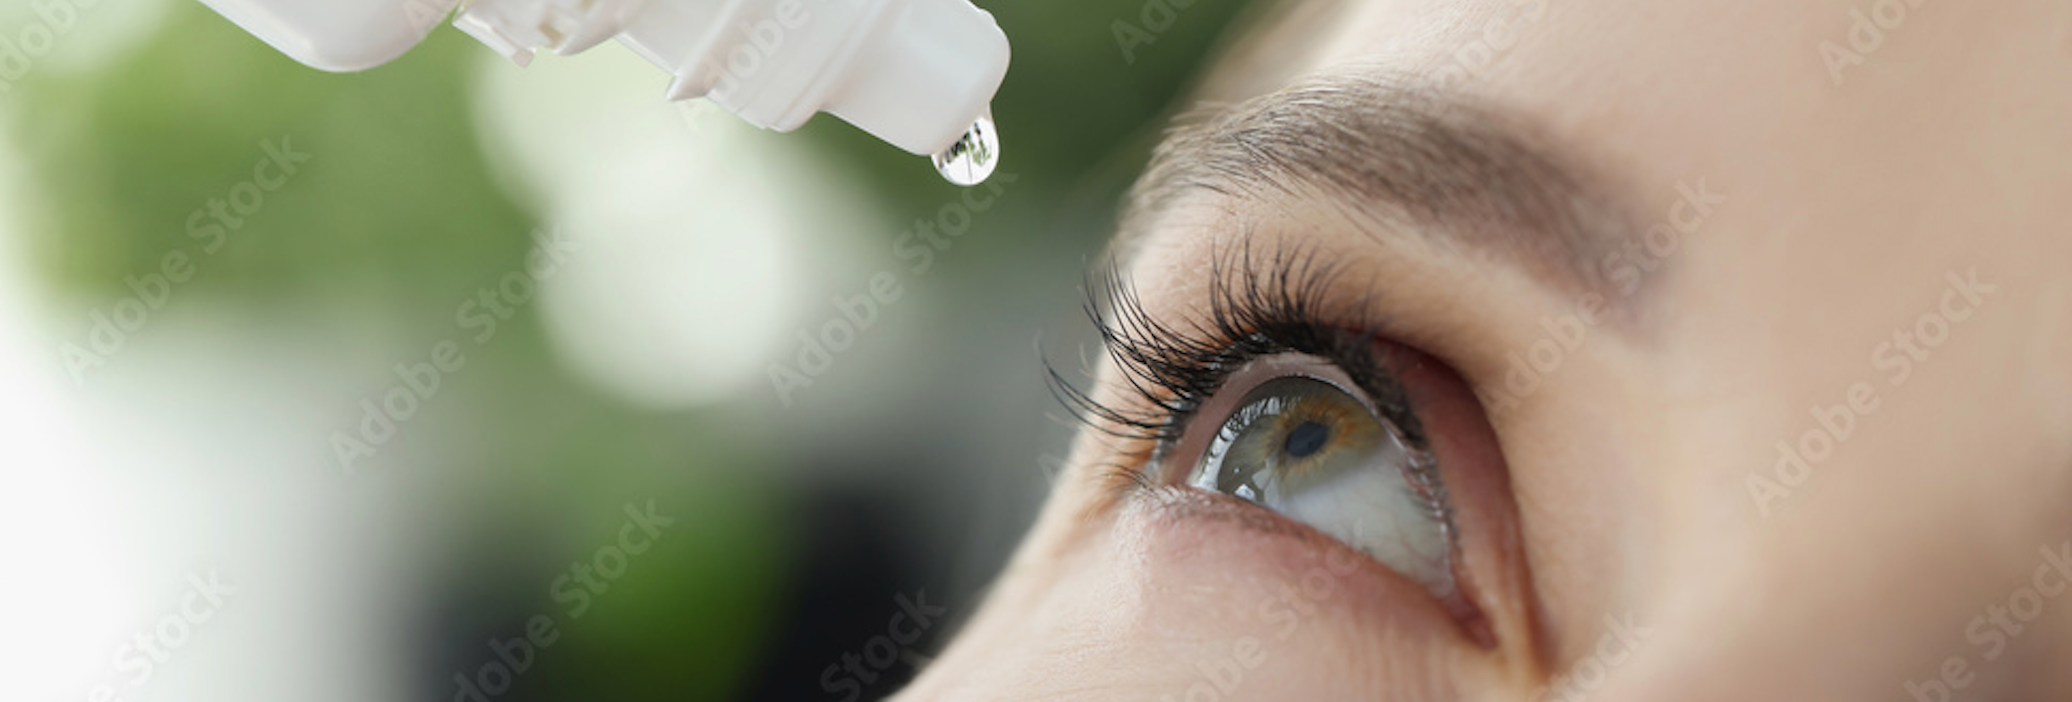 CDC investigating infections, 1 death linked to eye drops